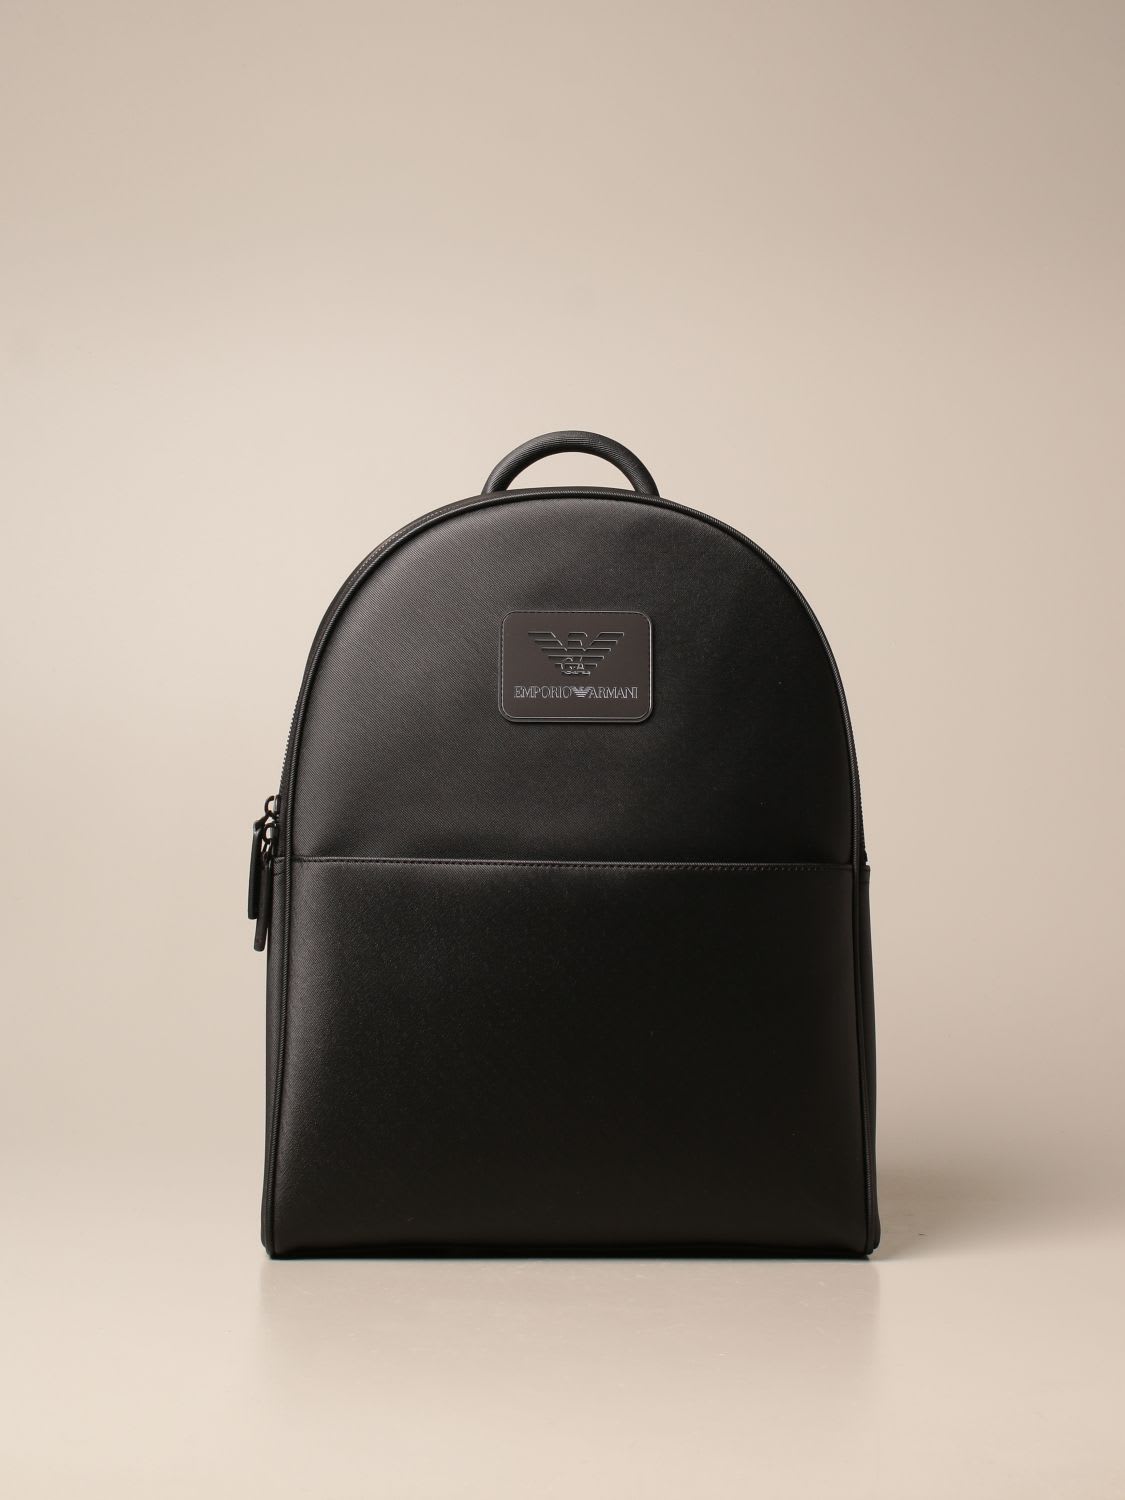 Emporio Armani Backpack Emporio Armani Backpack In Saffiano Synthetic Leather